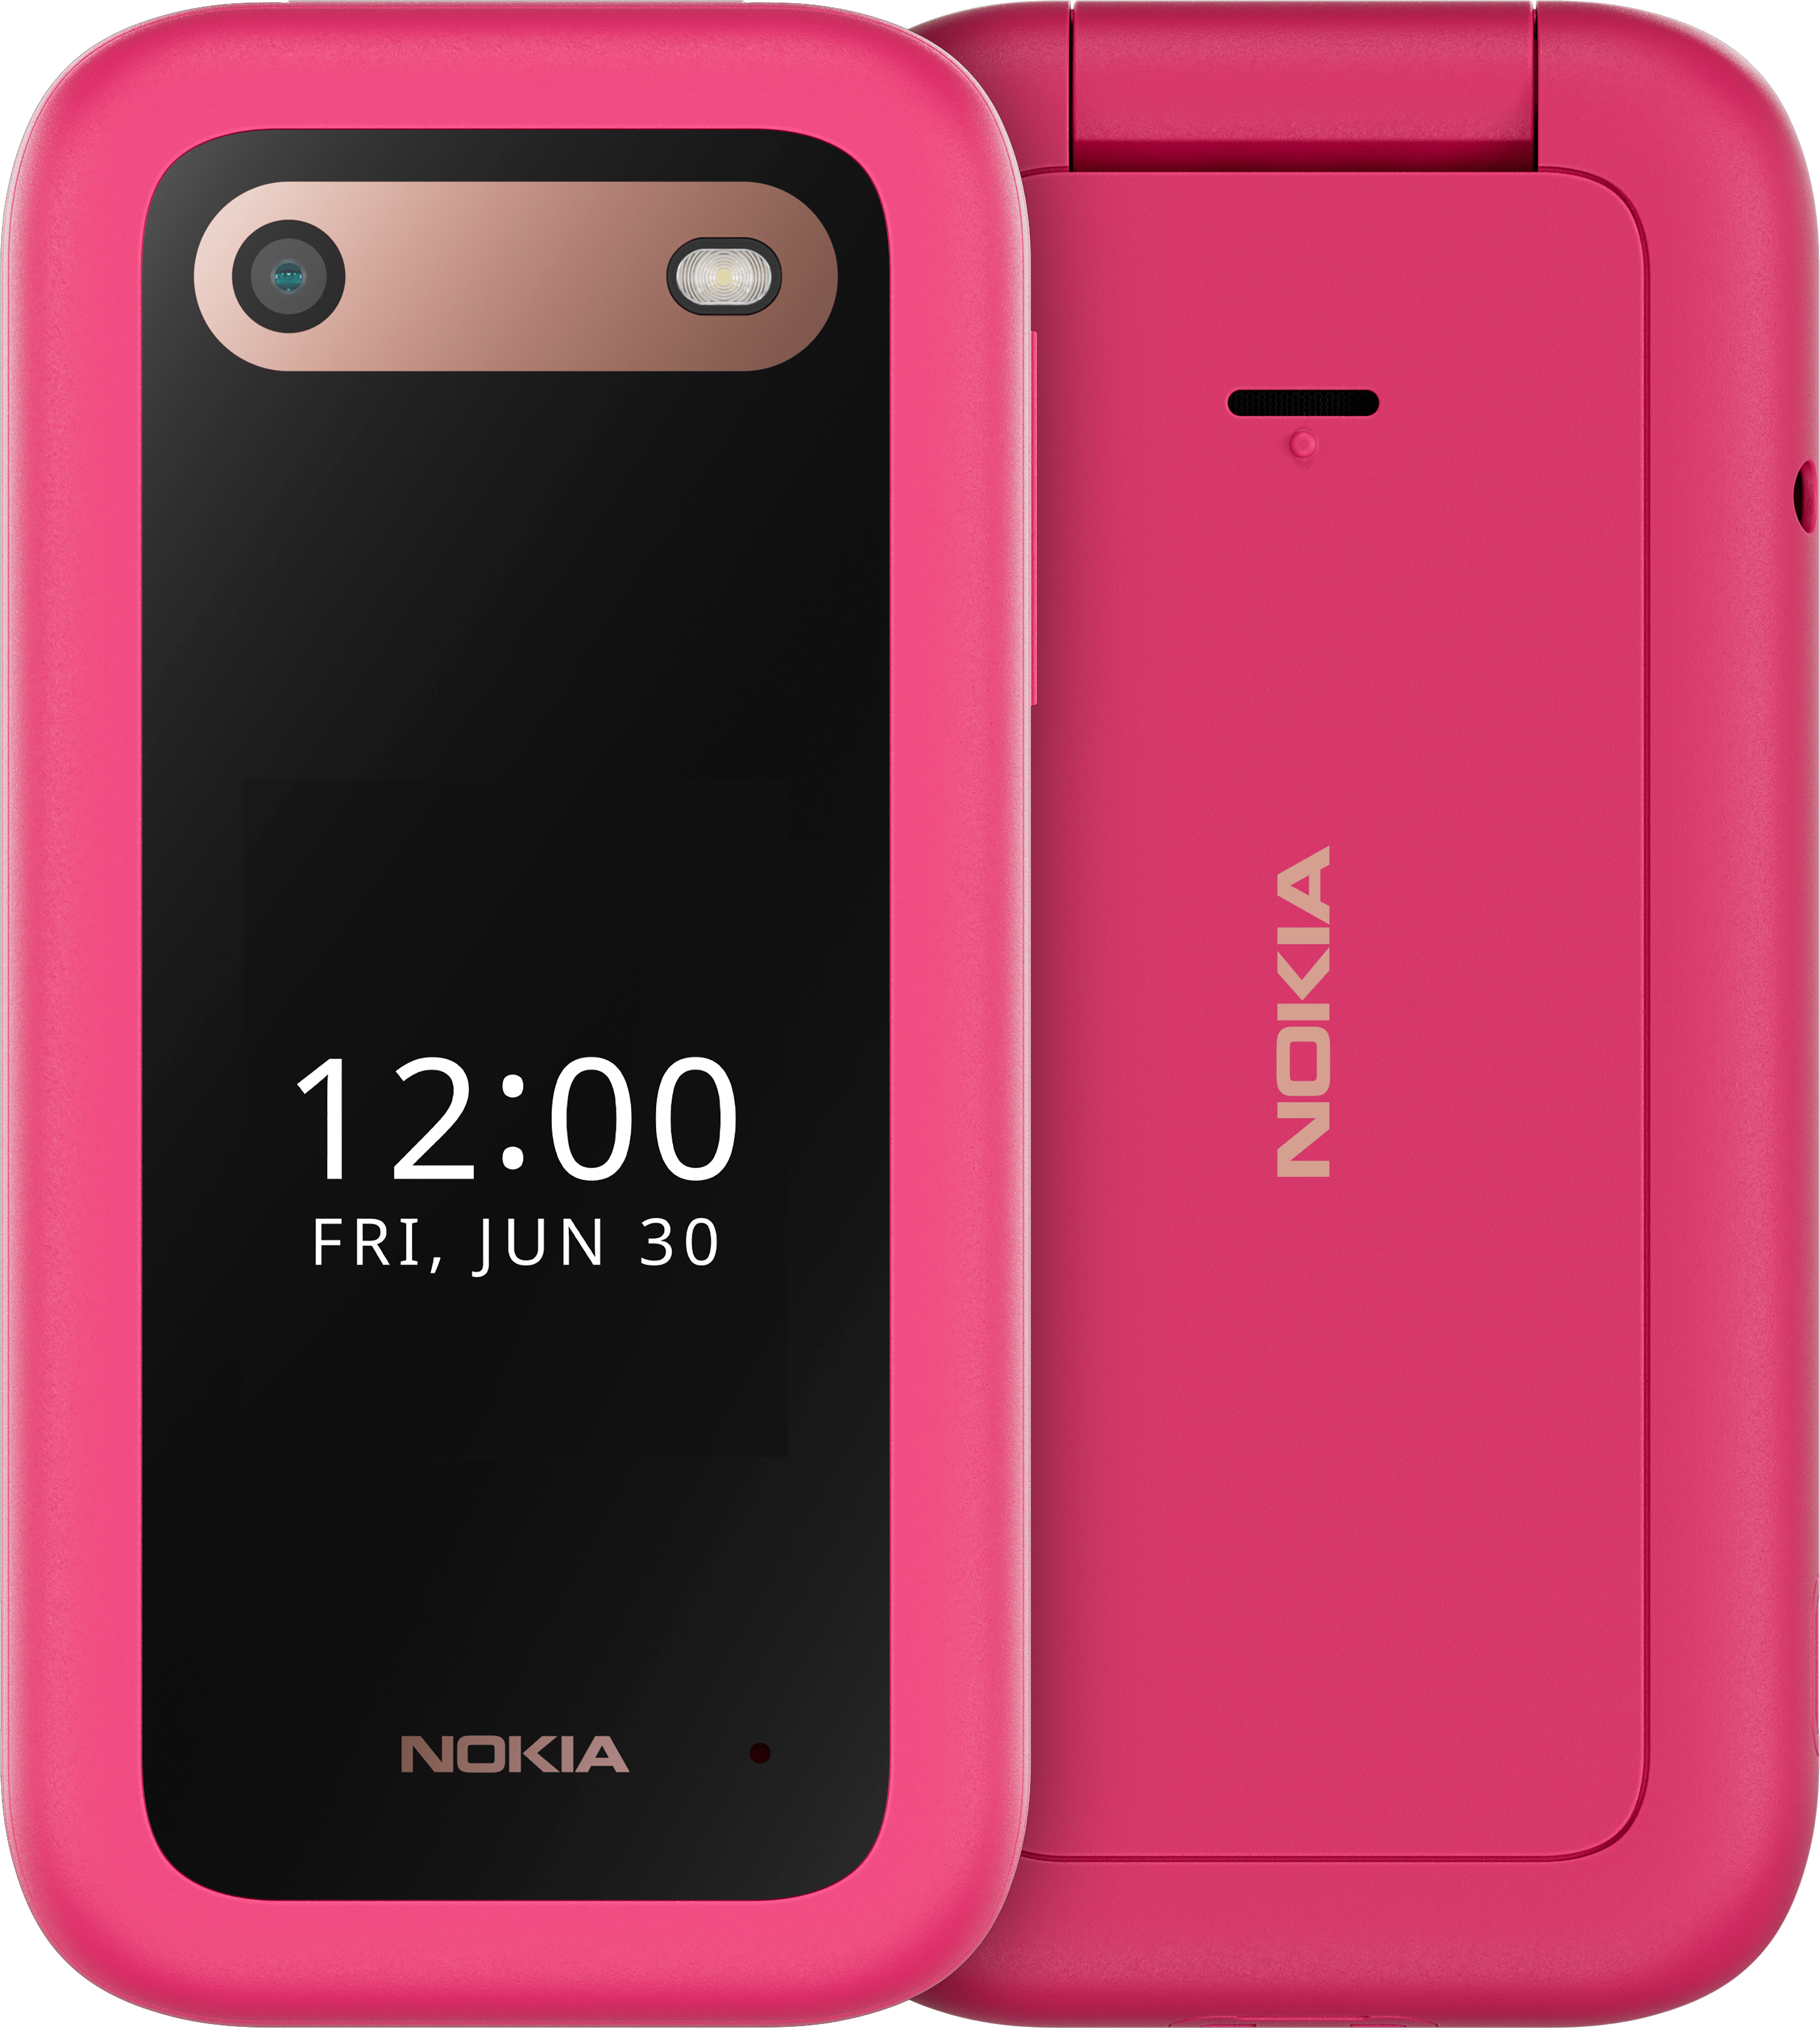 Repairable and fashionable: 5G G42 Nokia So Pink goes